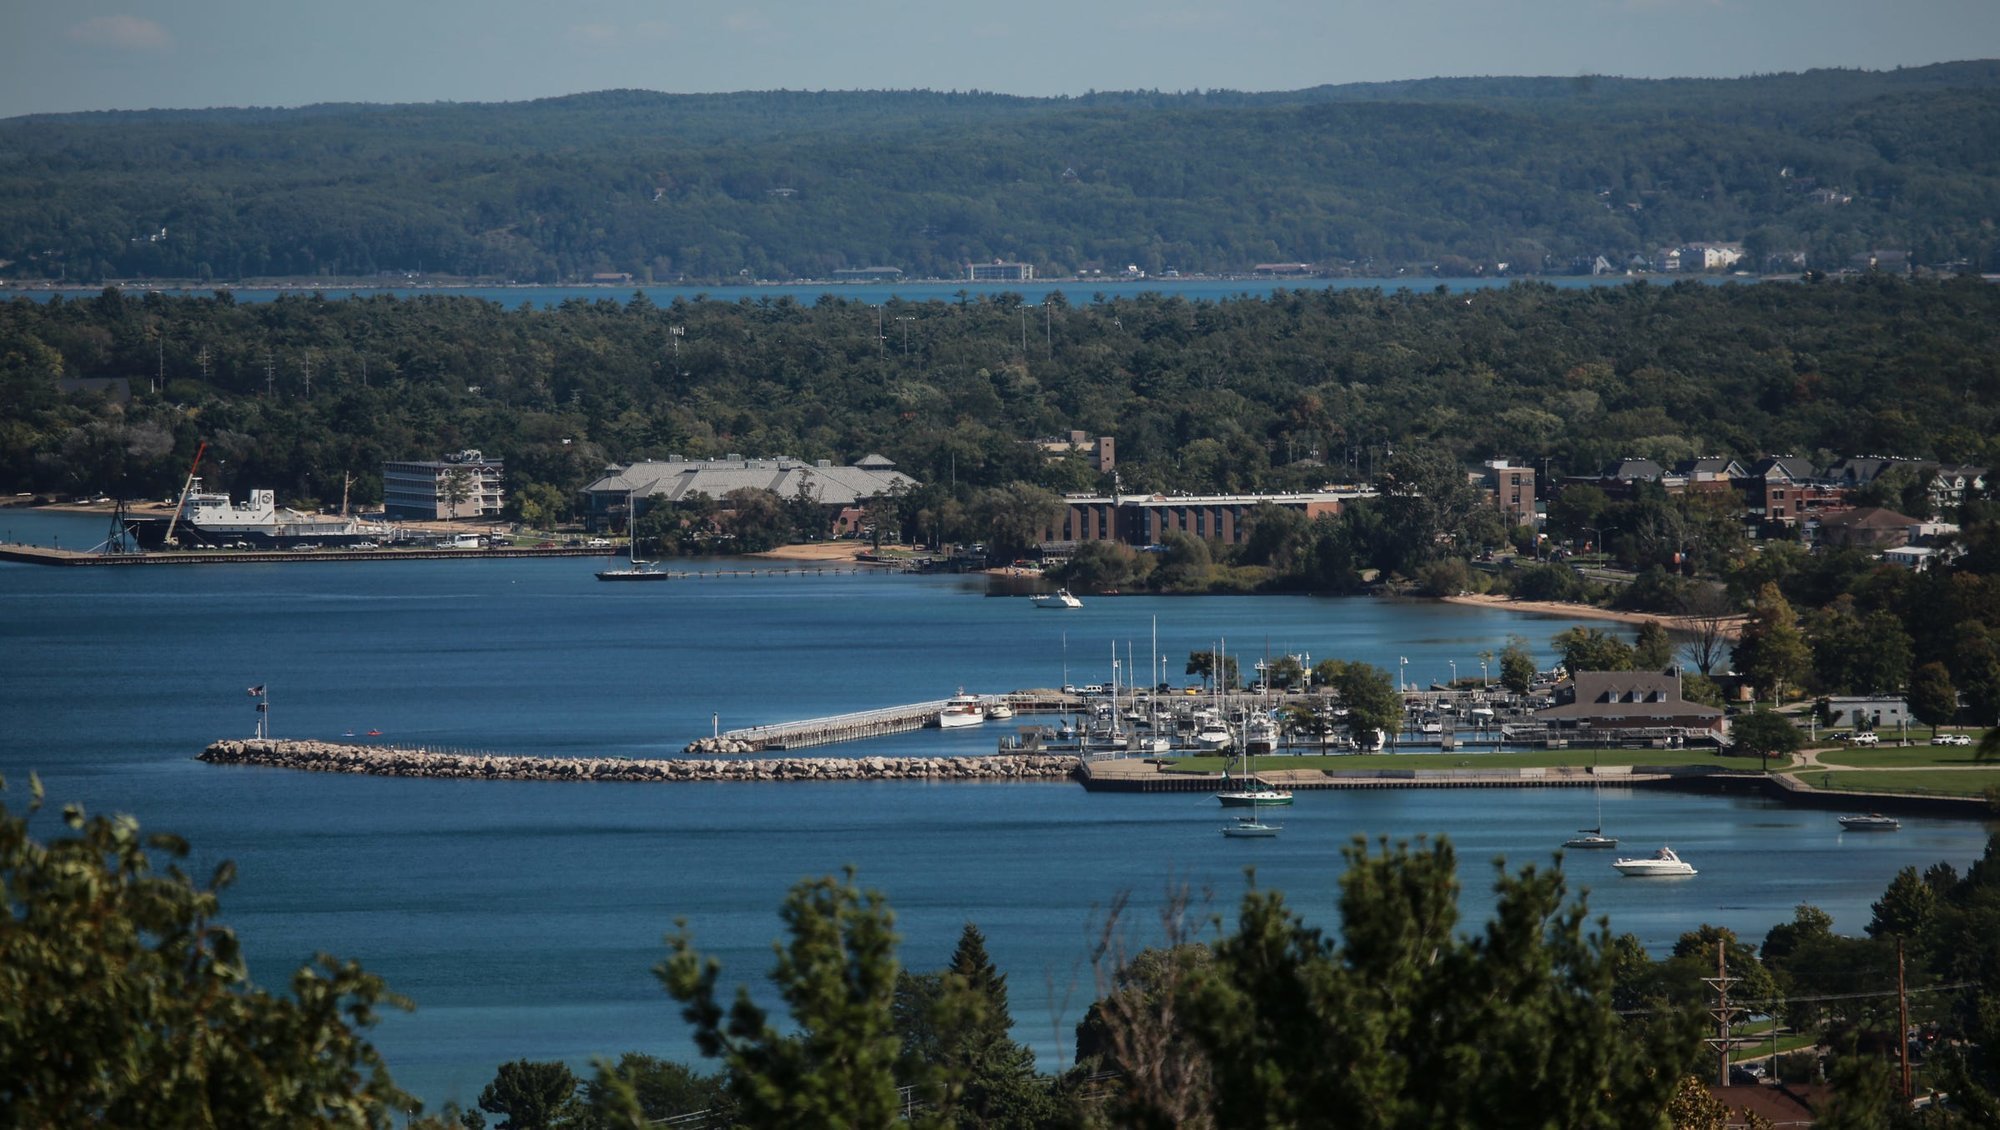 Traverse City condominiums overlooking Grand Traverse Bay, with scenic landscapes and urban amenities.